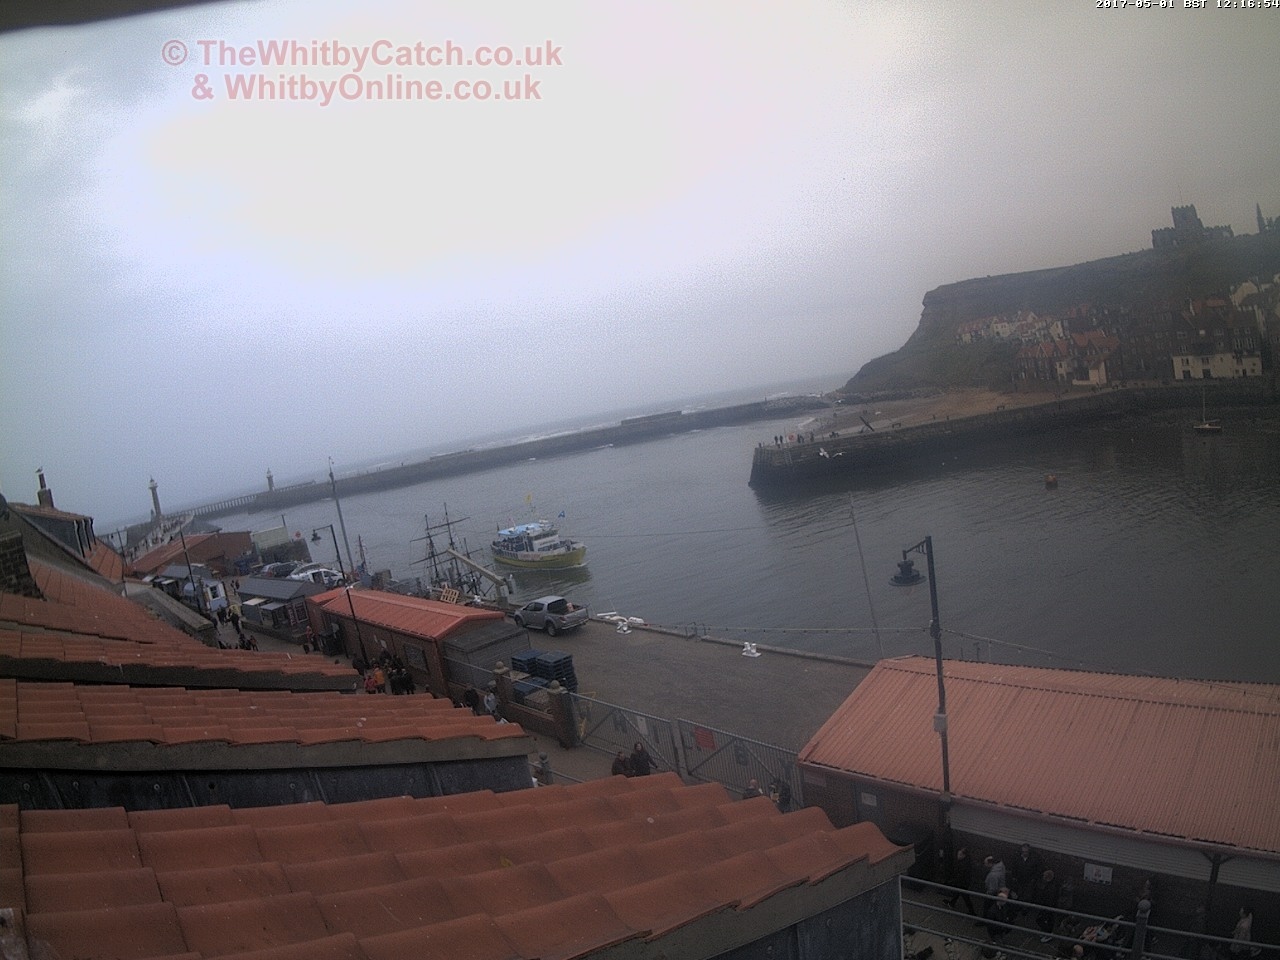 Whitby Mon 1st May 2017 12:17.